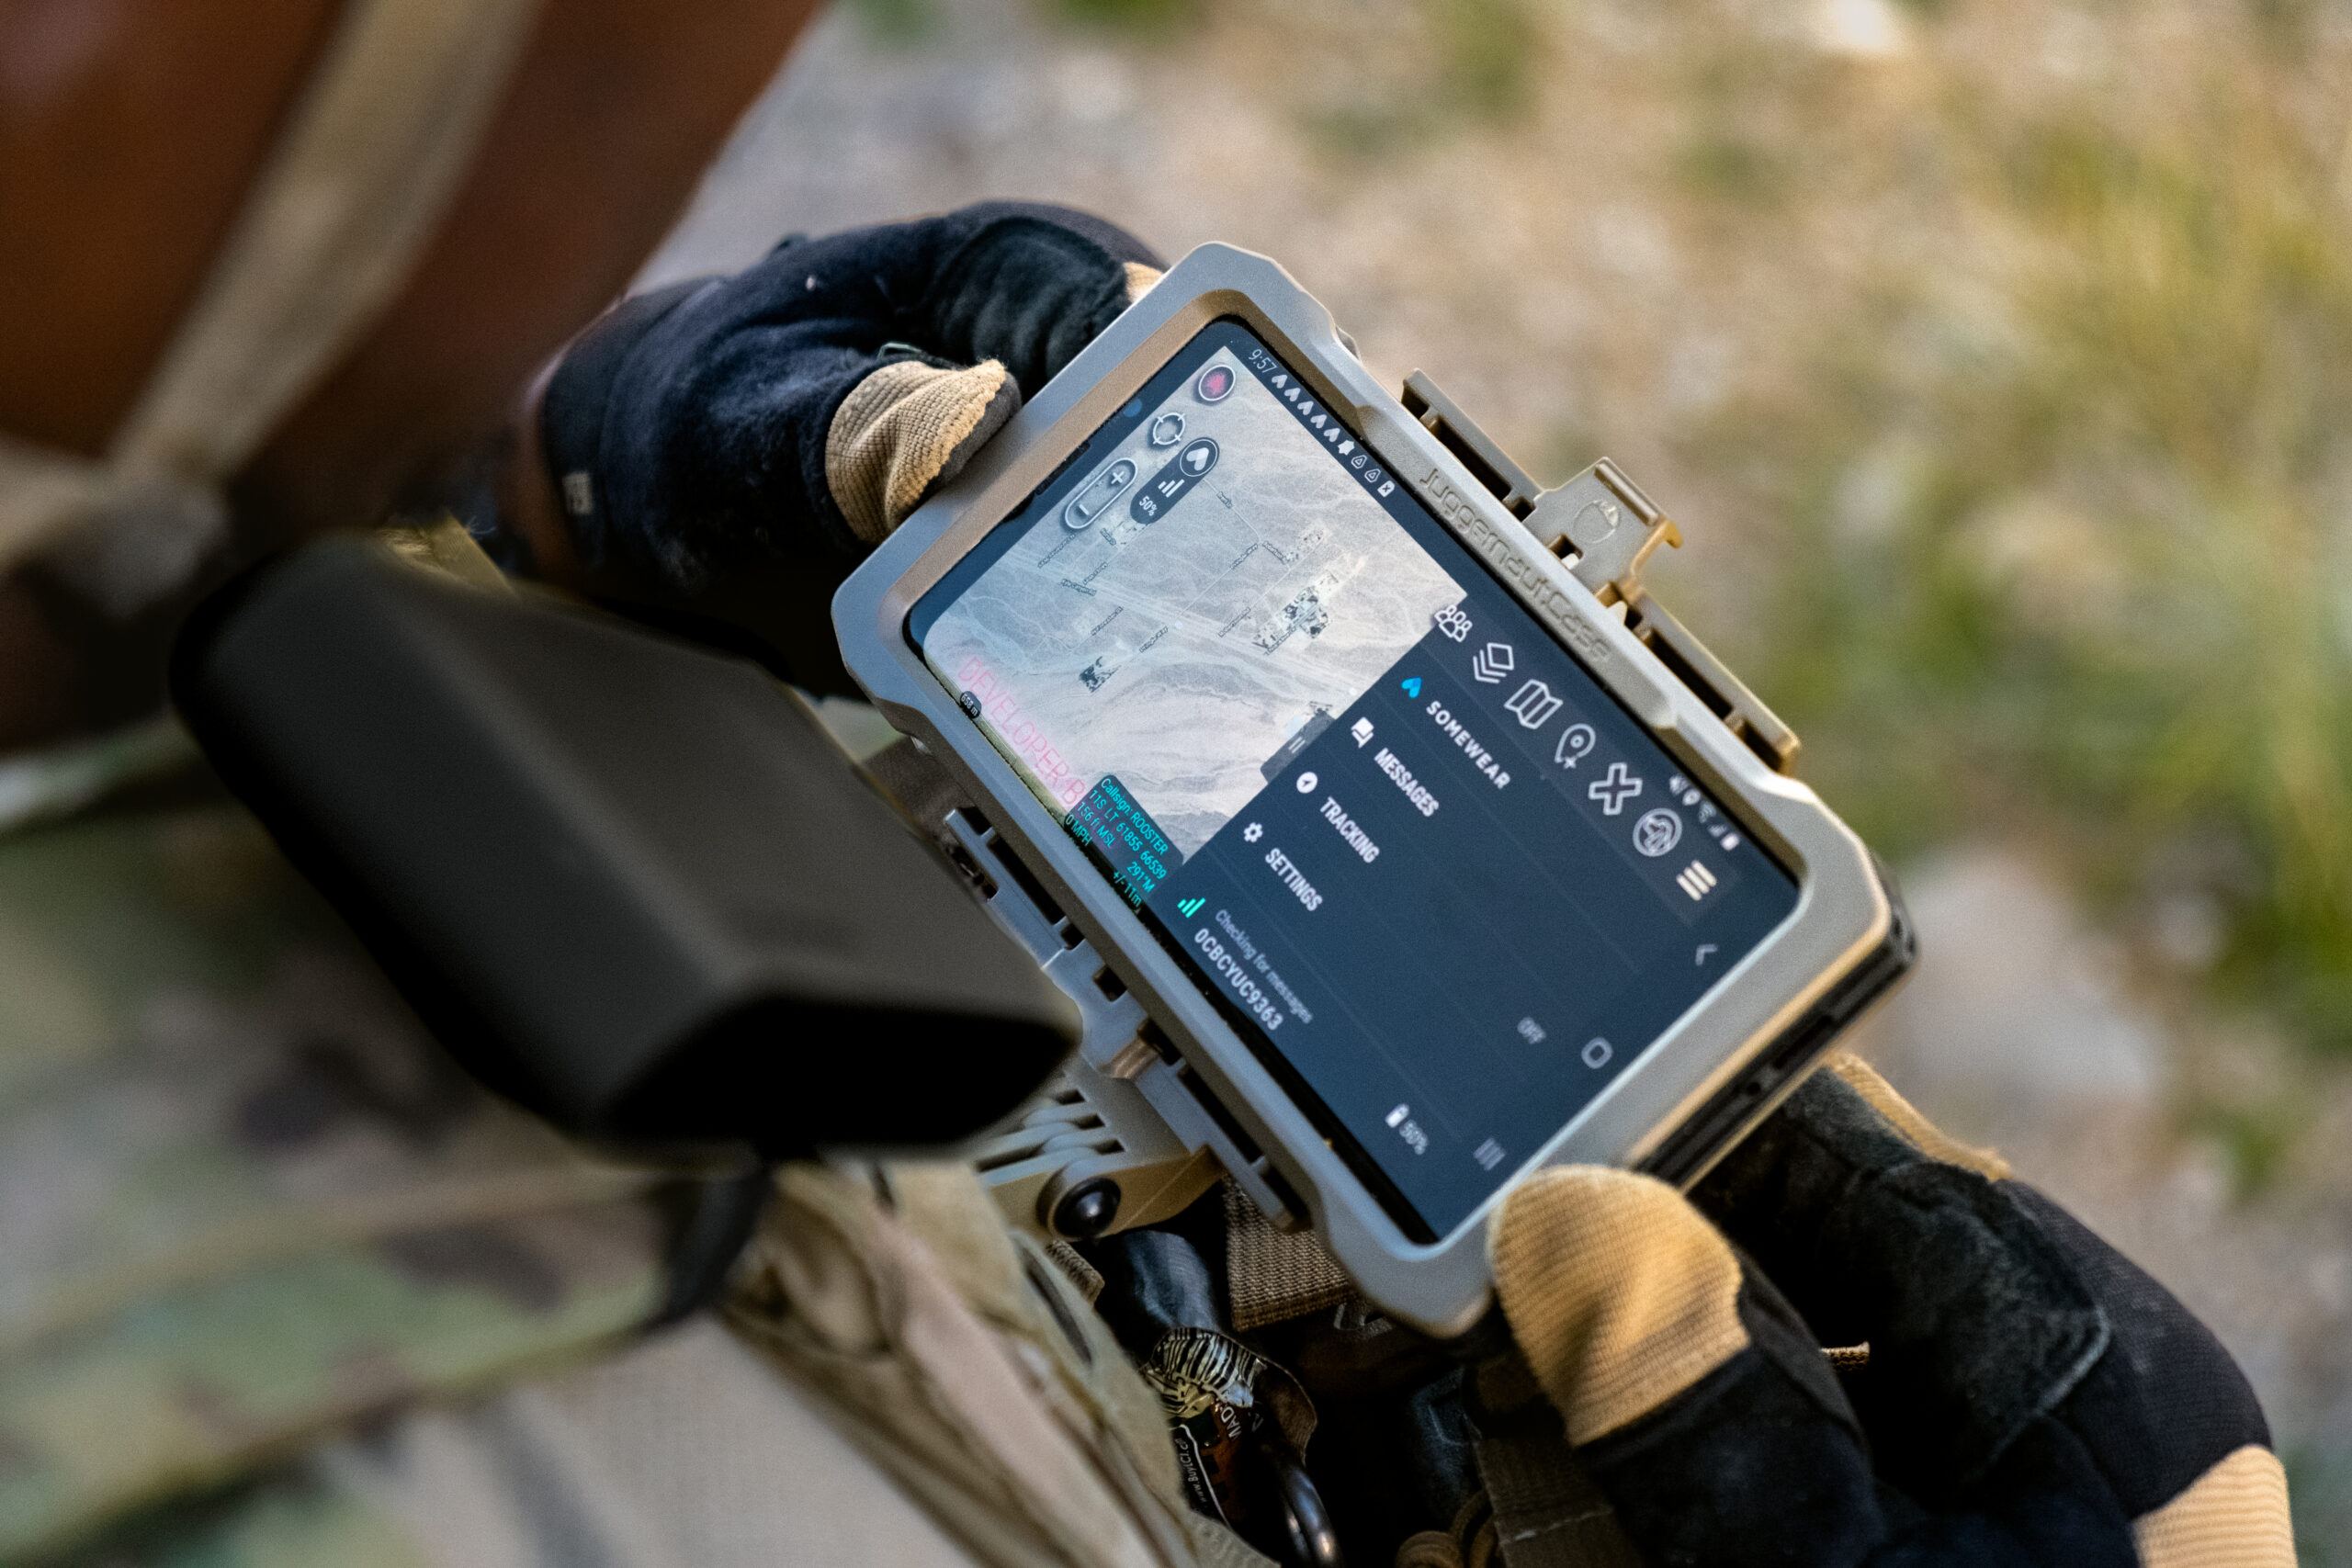 Node includes the Somewear Grid software platform to make sure that the operator can maintain situational awareness and communications in any environment. (Photo courtesy of Somewear)